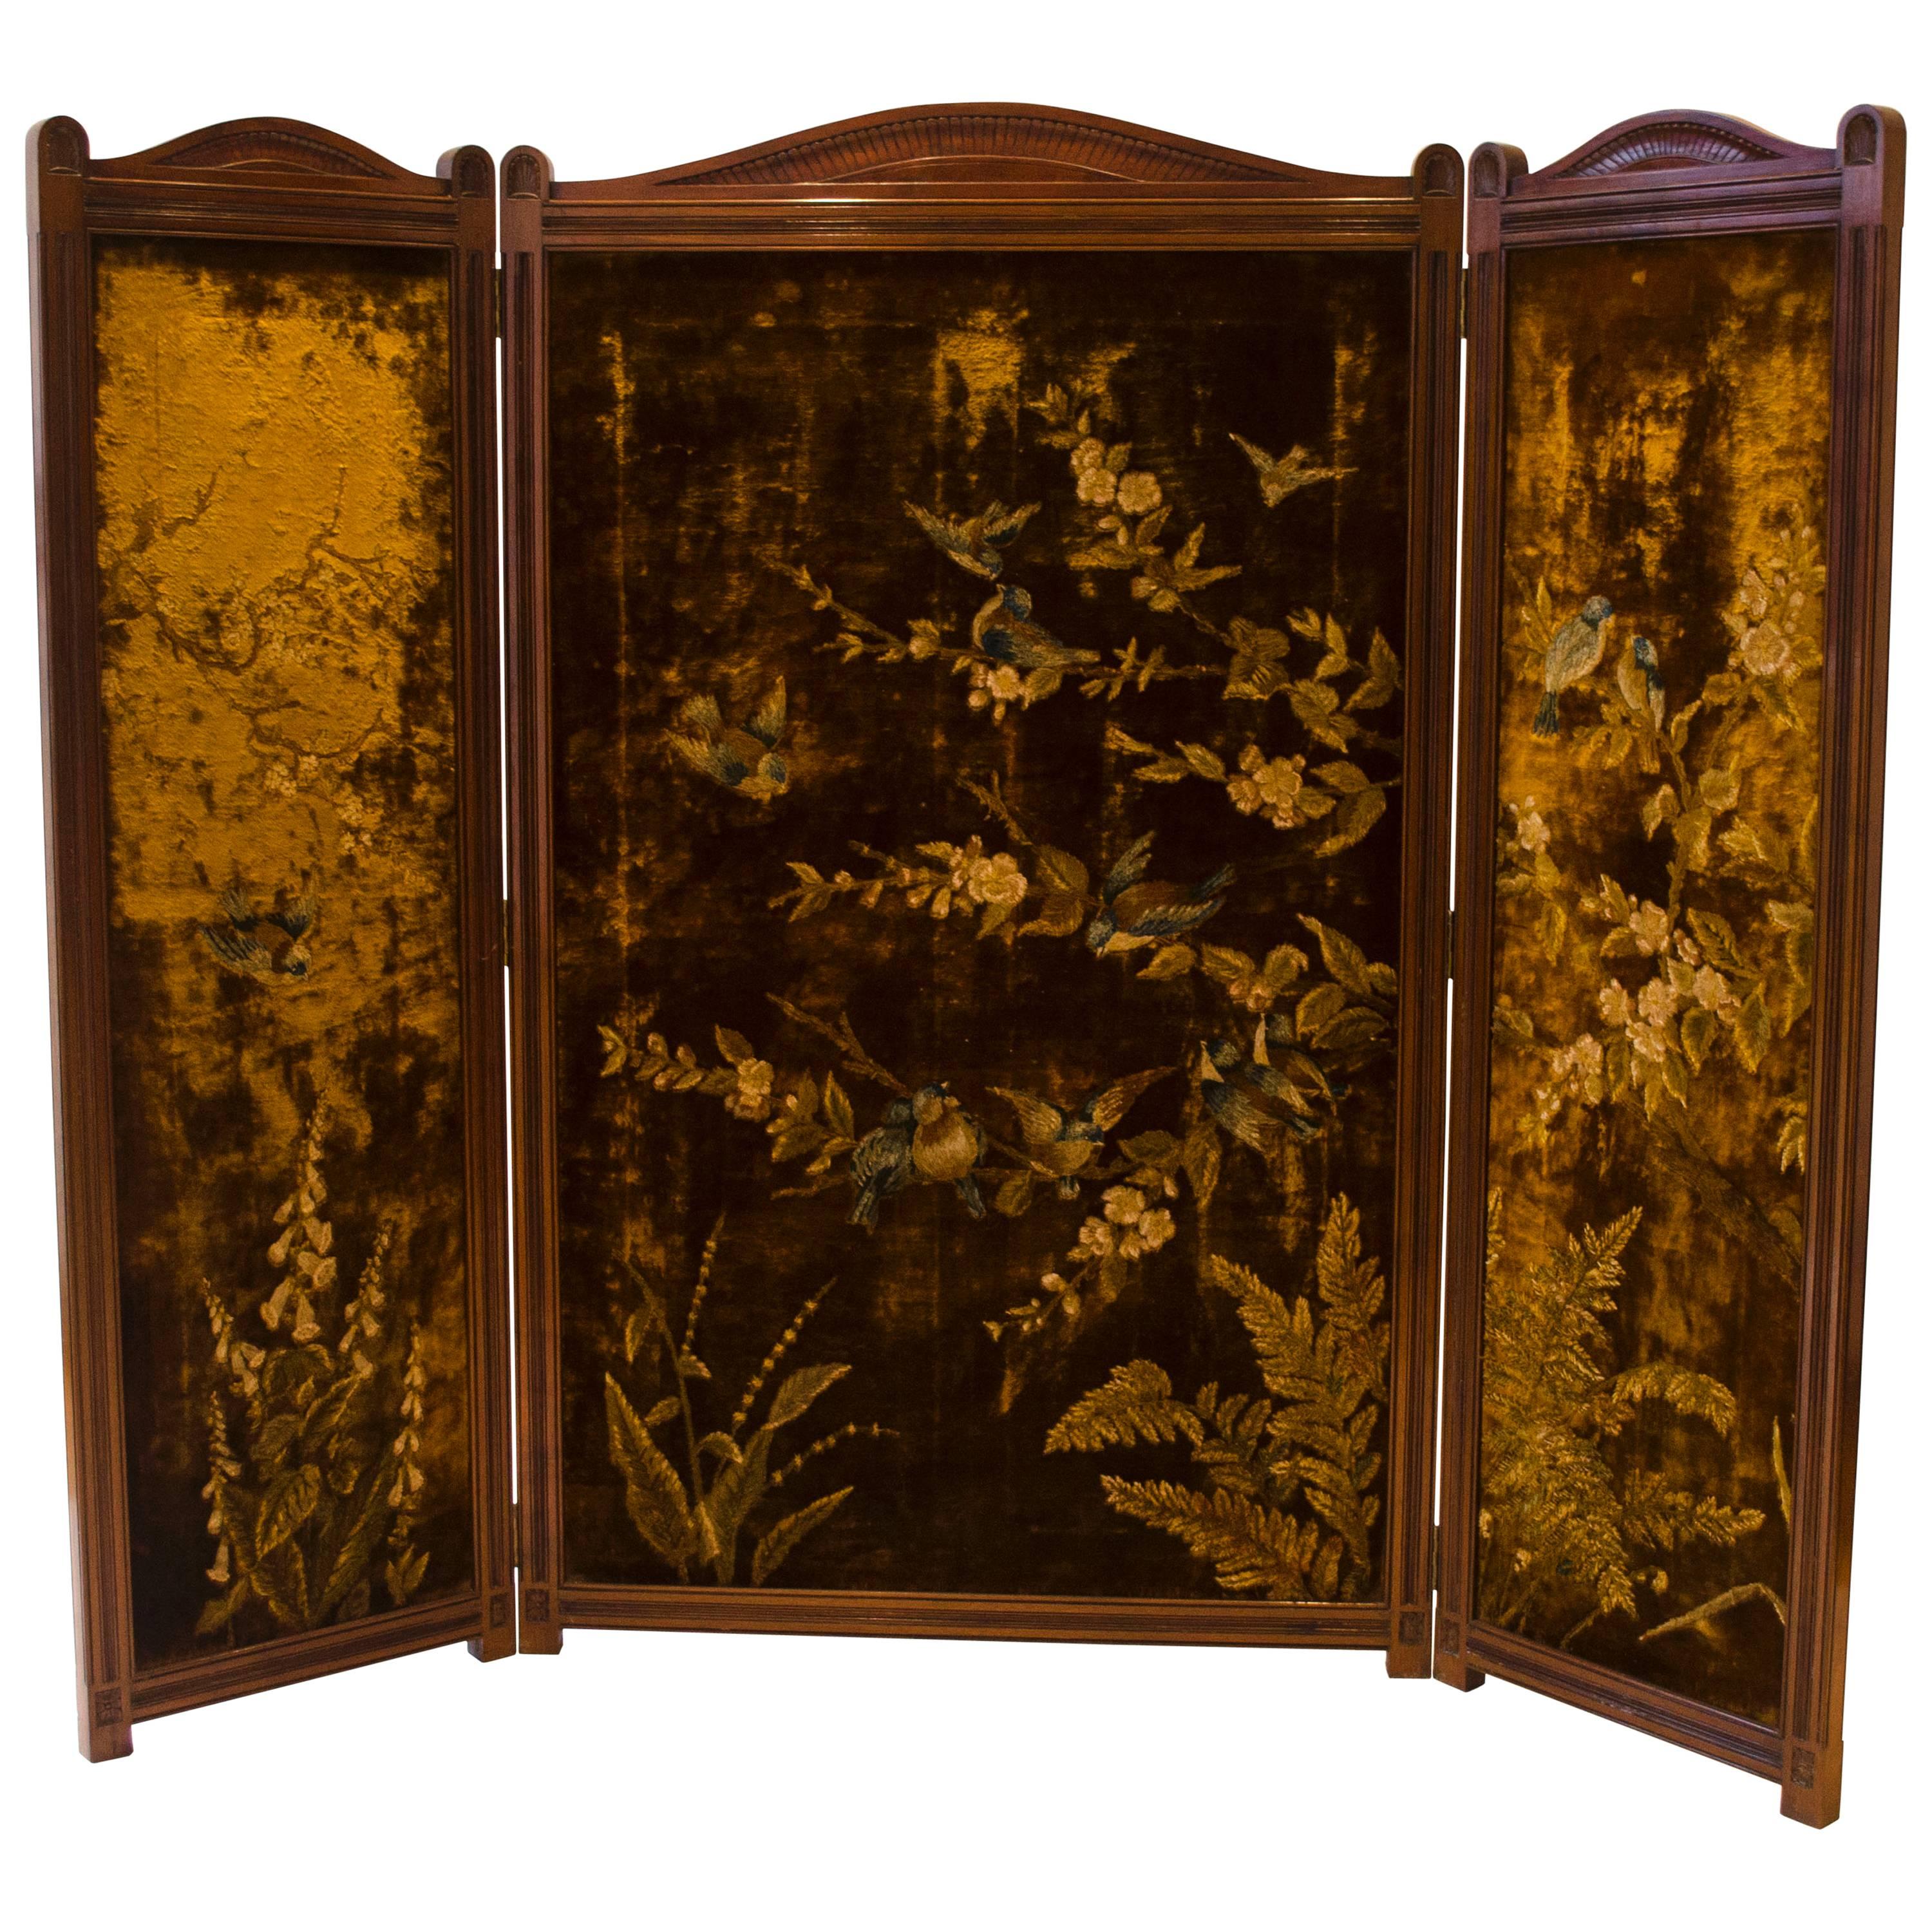 Gillows attr, An Aesthetic Movement Three-Fold Screen with Birds Amongst Blossom For Sale